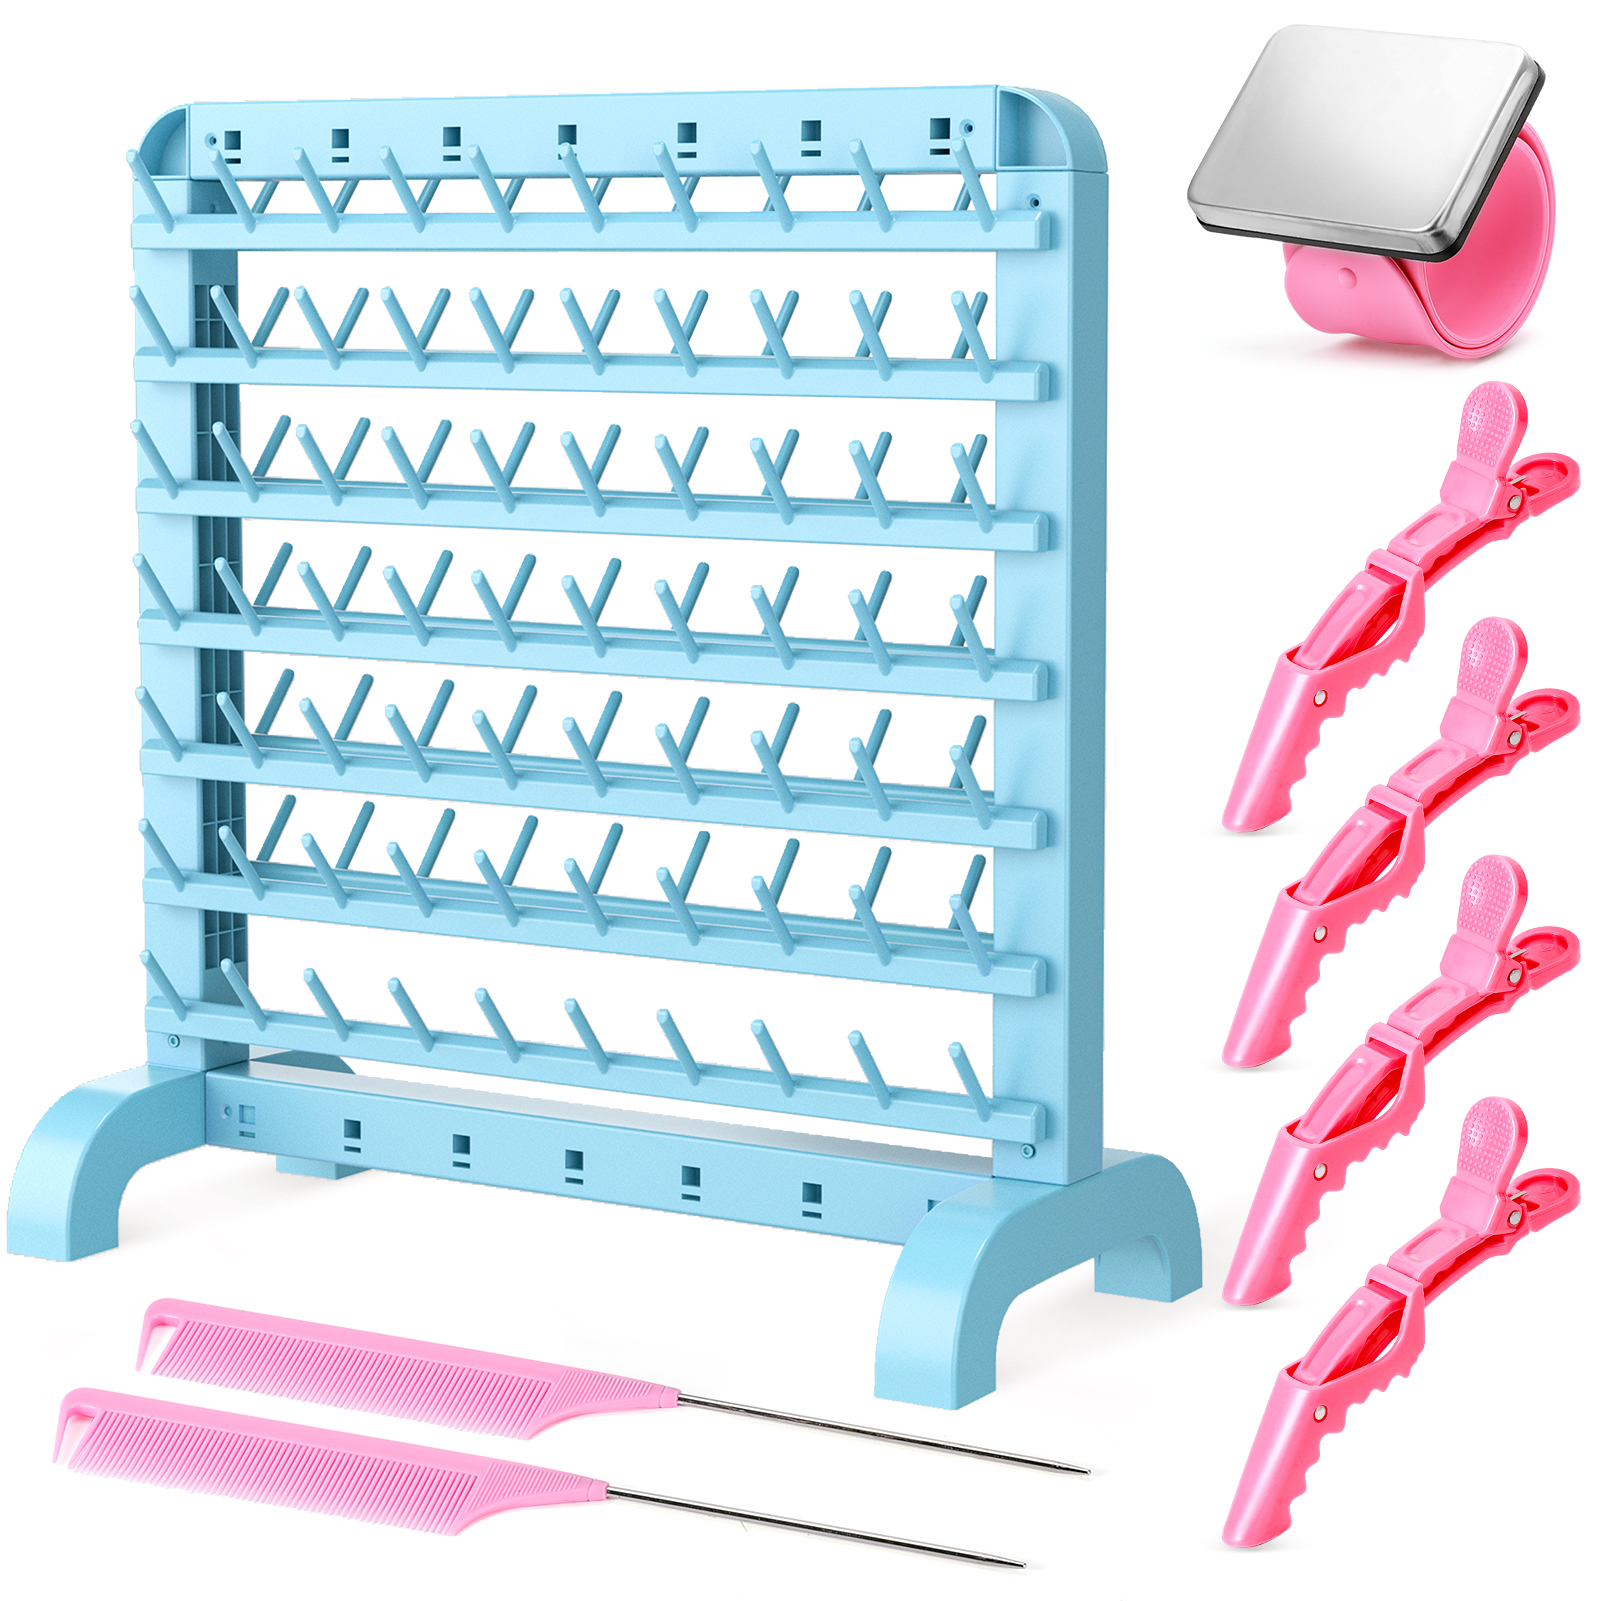 Portable Braiding Hair Rack 120 Pegs, 2-in-1 Standing Hair Holder Braid  Rack for Braiding Hair, Double Sided Hair Separator Stand for Stylists,  Hair Extension Holder with Hair Supplies 